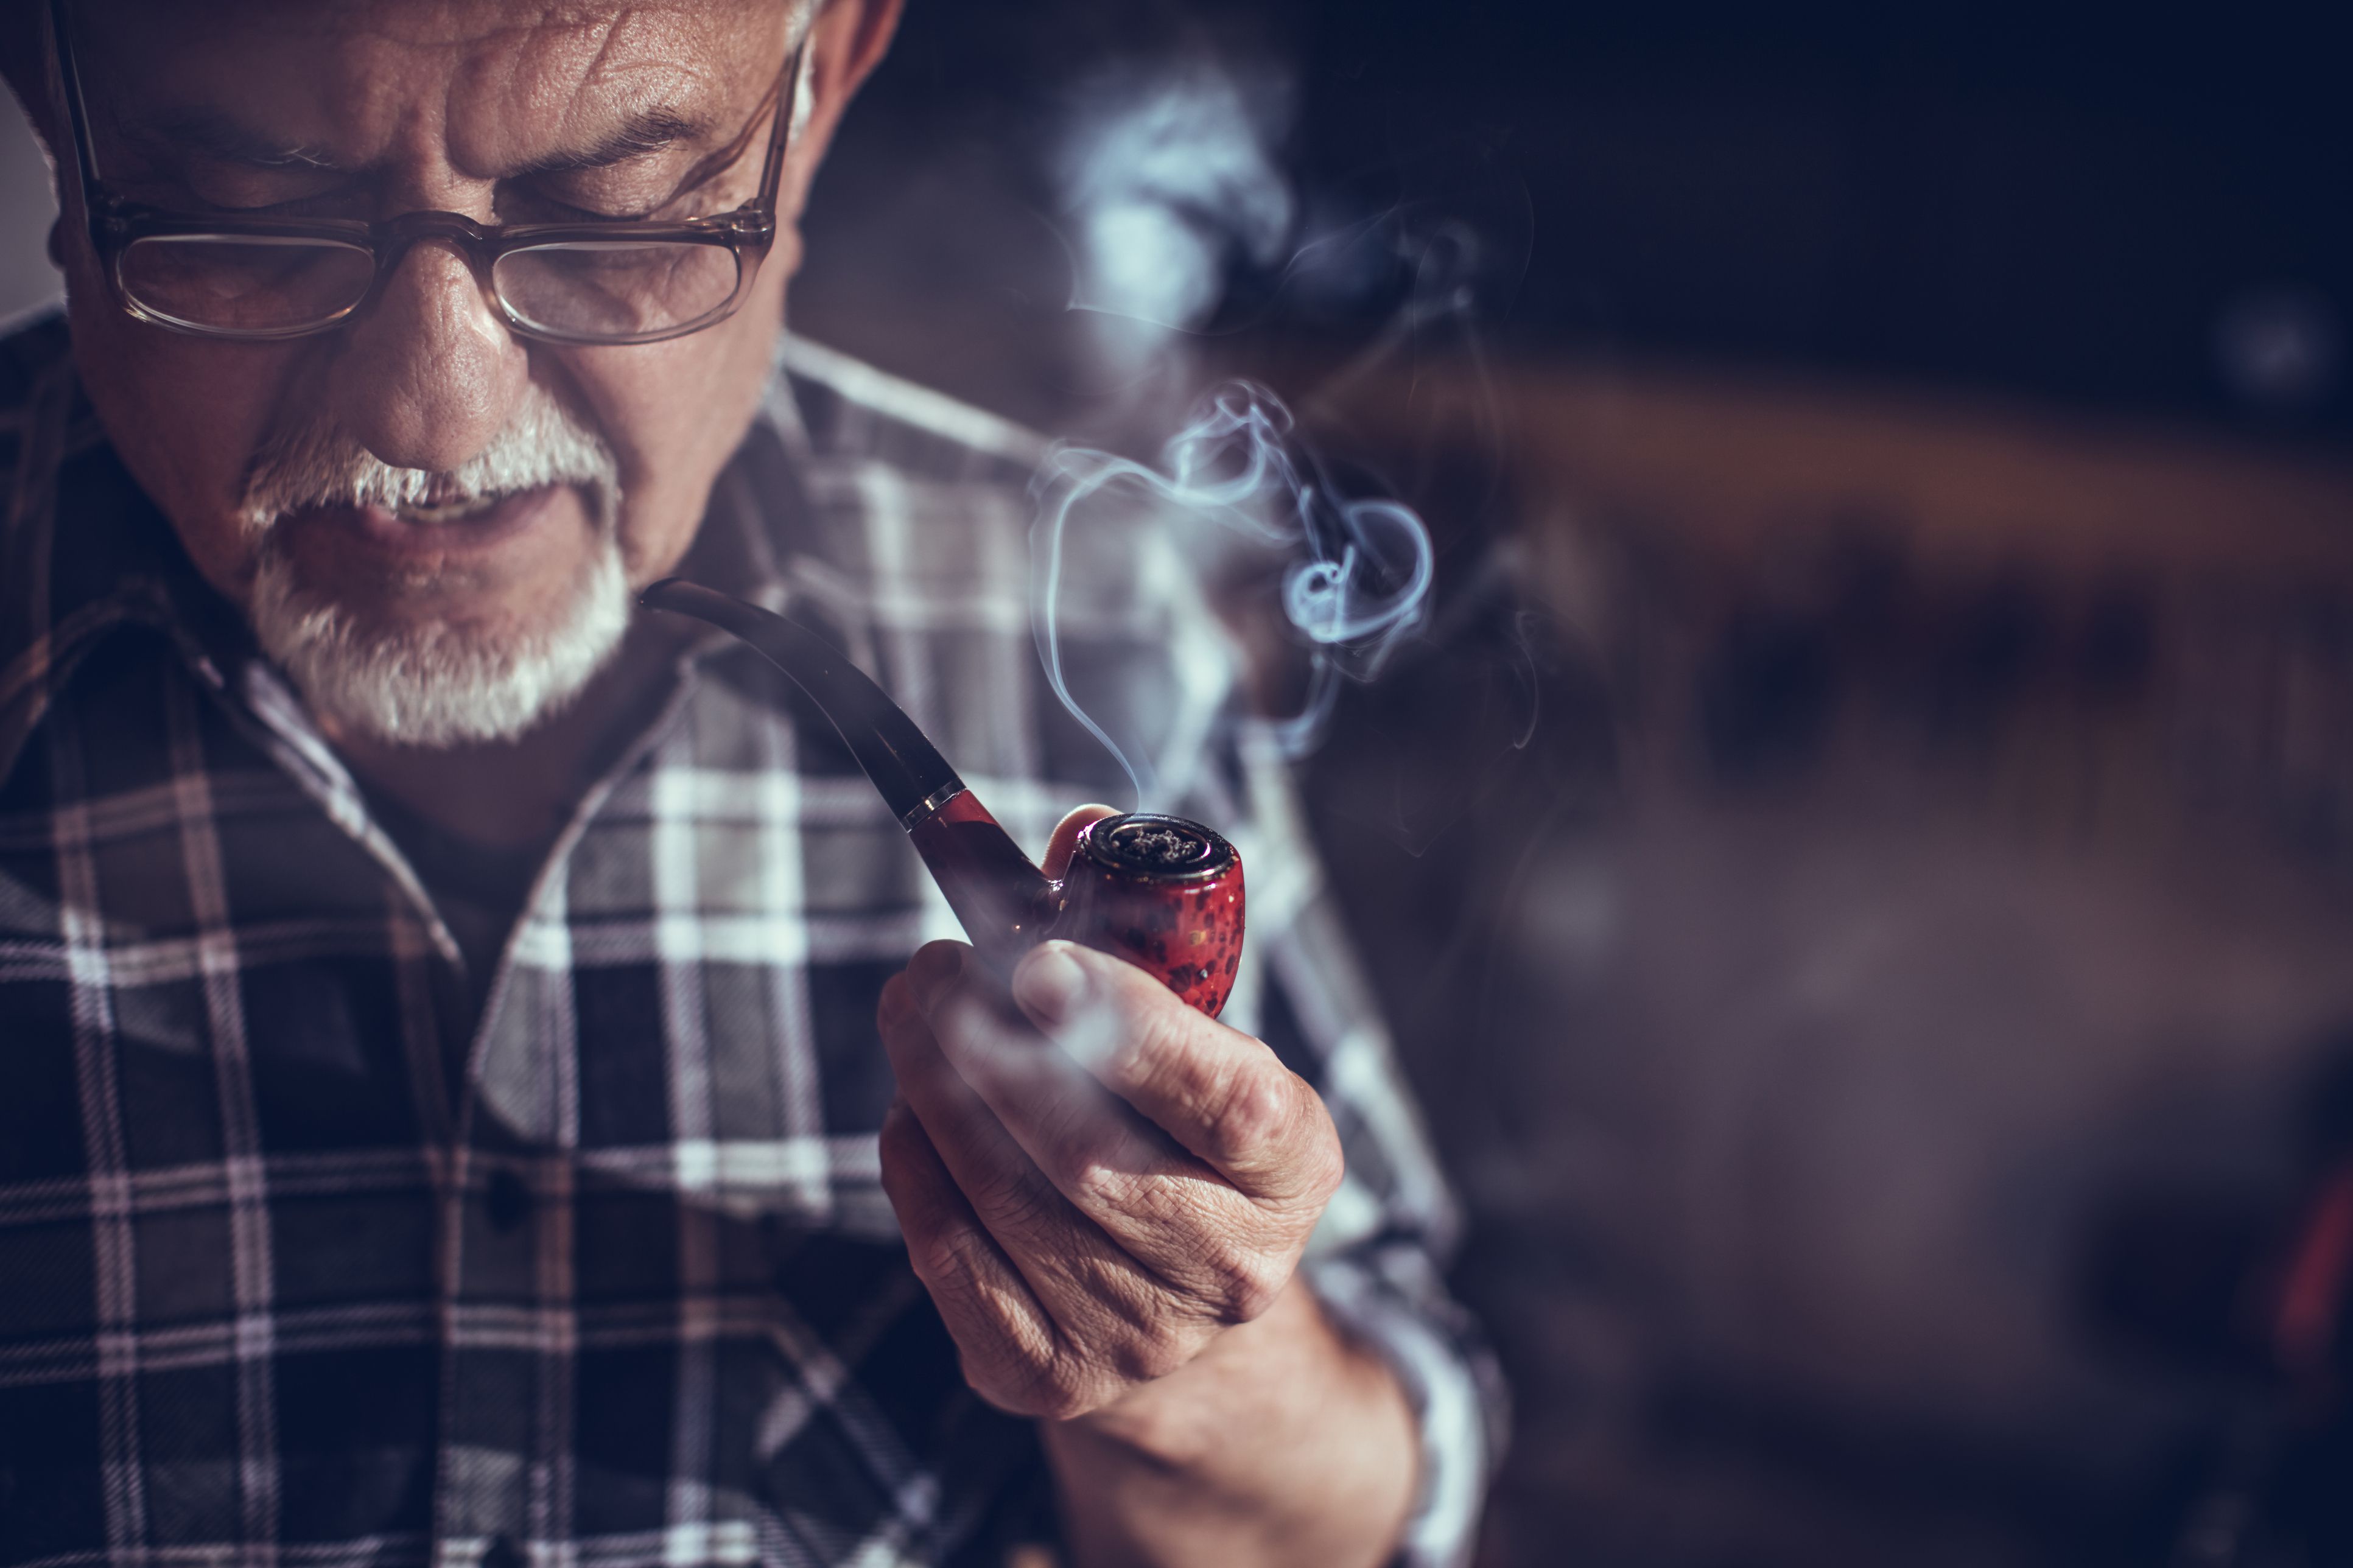 old-man-smoking-with-pipe-696654328-595674723df78c4eb62ad9ce